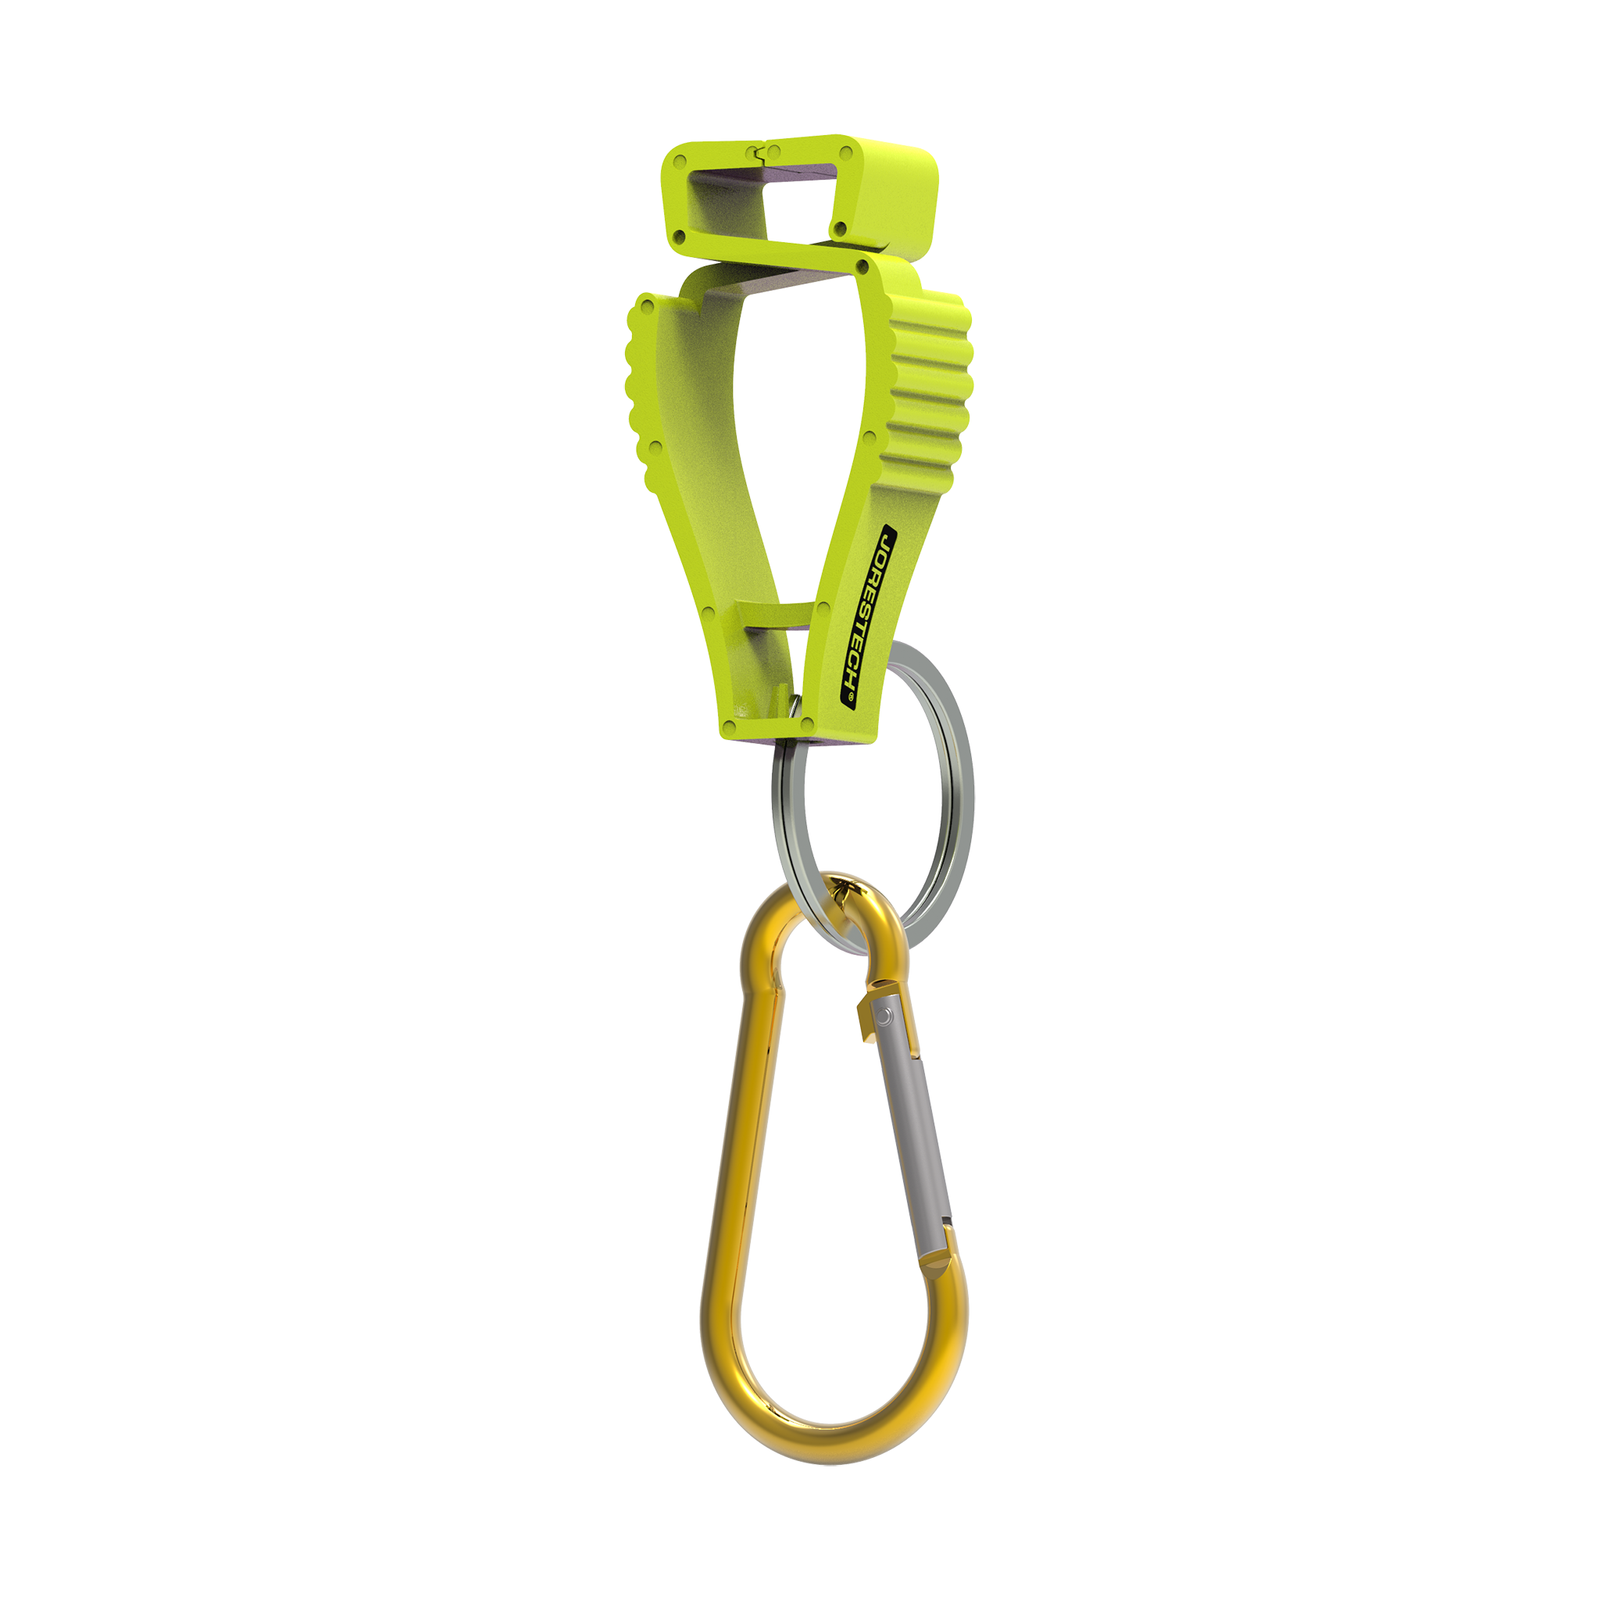 Yellow JORESTECH glove clip safety holders with carabiner 